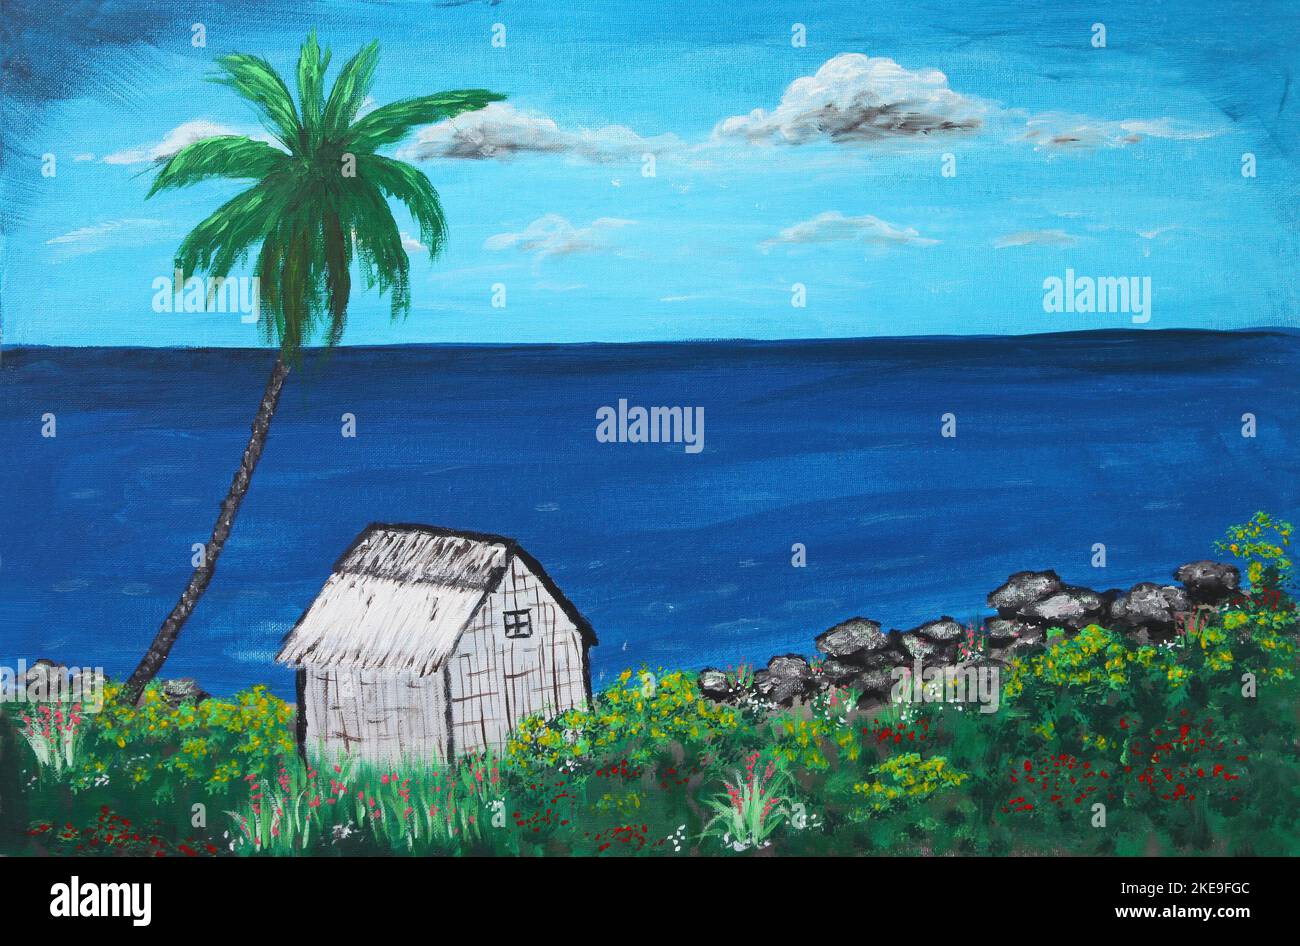 Oil painting of White beach hut by tropical ocean Stock Photo